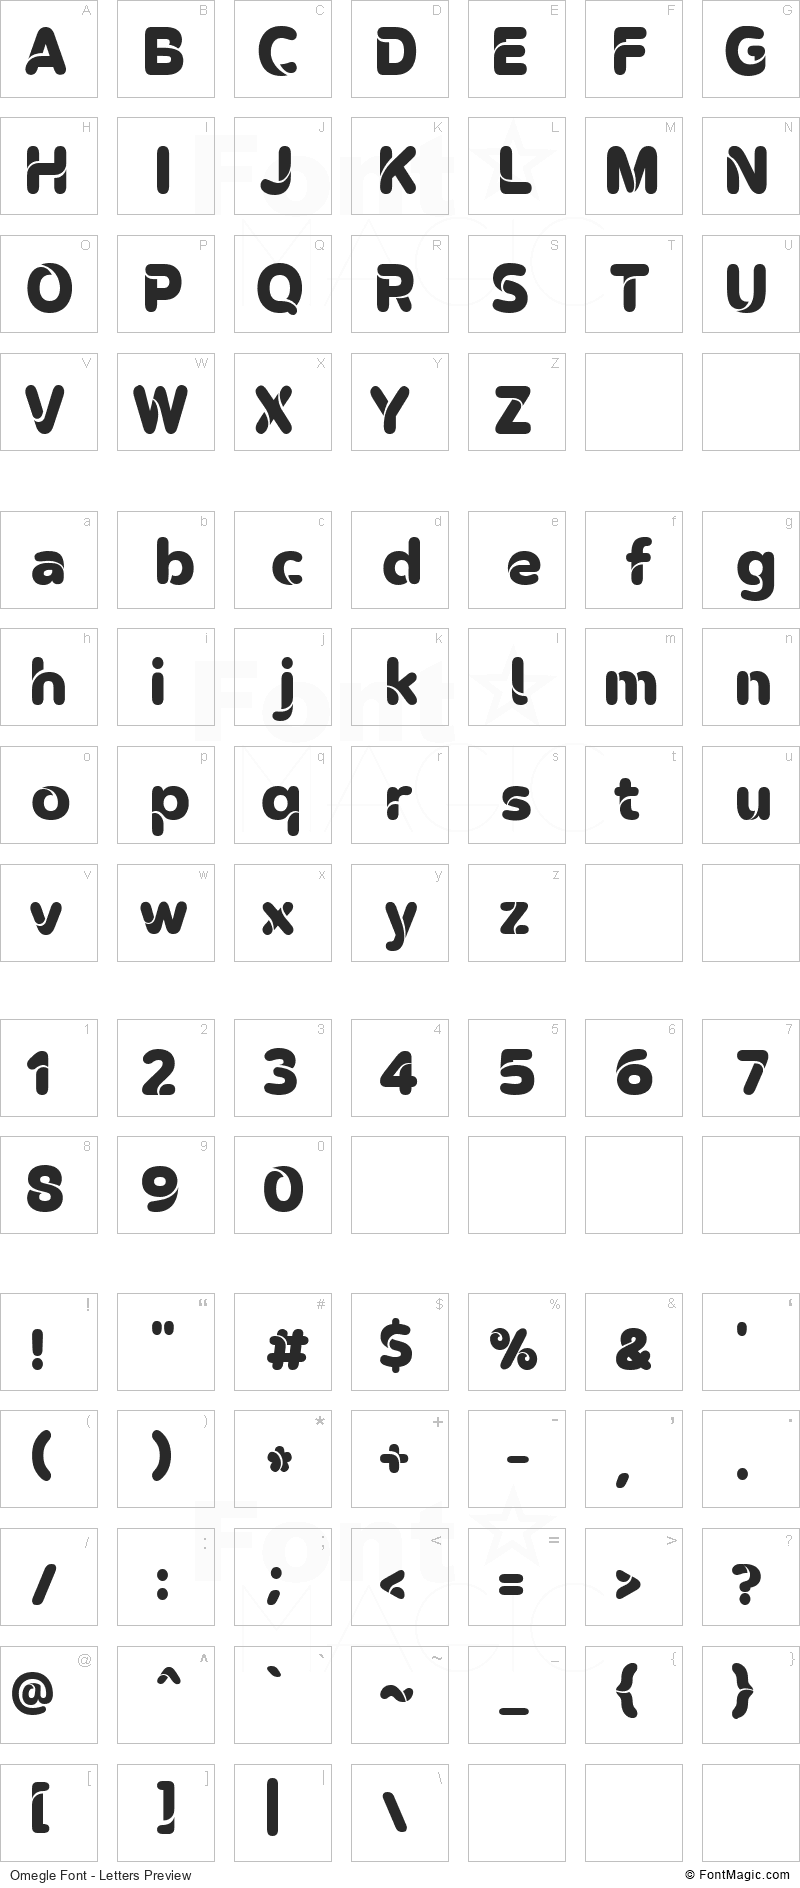 Omegle Font - All Latters Preview Chart